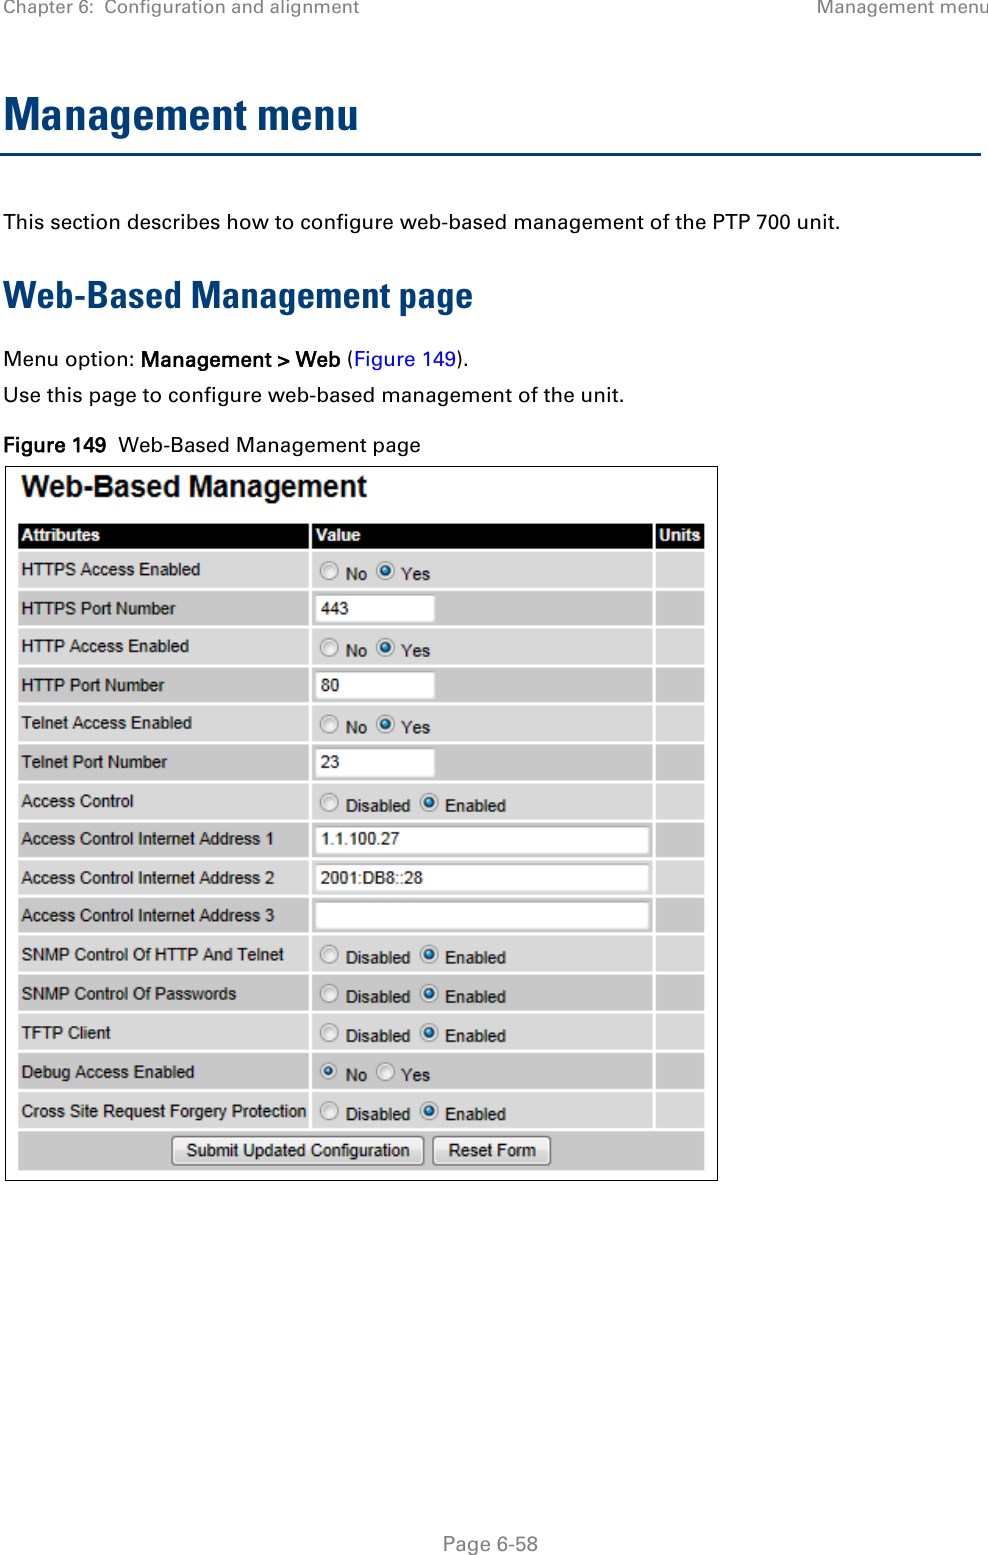 Chapter 6:  Configuration and alignment Management menu  Management menu This section describes how to configure web-based management of the PTP 700 unit. Web-Based Management page Menu option: Management &gt; Web (Figure 149). Use this page to configure web-based management of the unit. Figure 149  Web-Based Management page    Page 6-58 